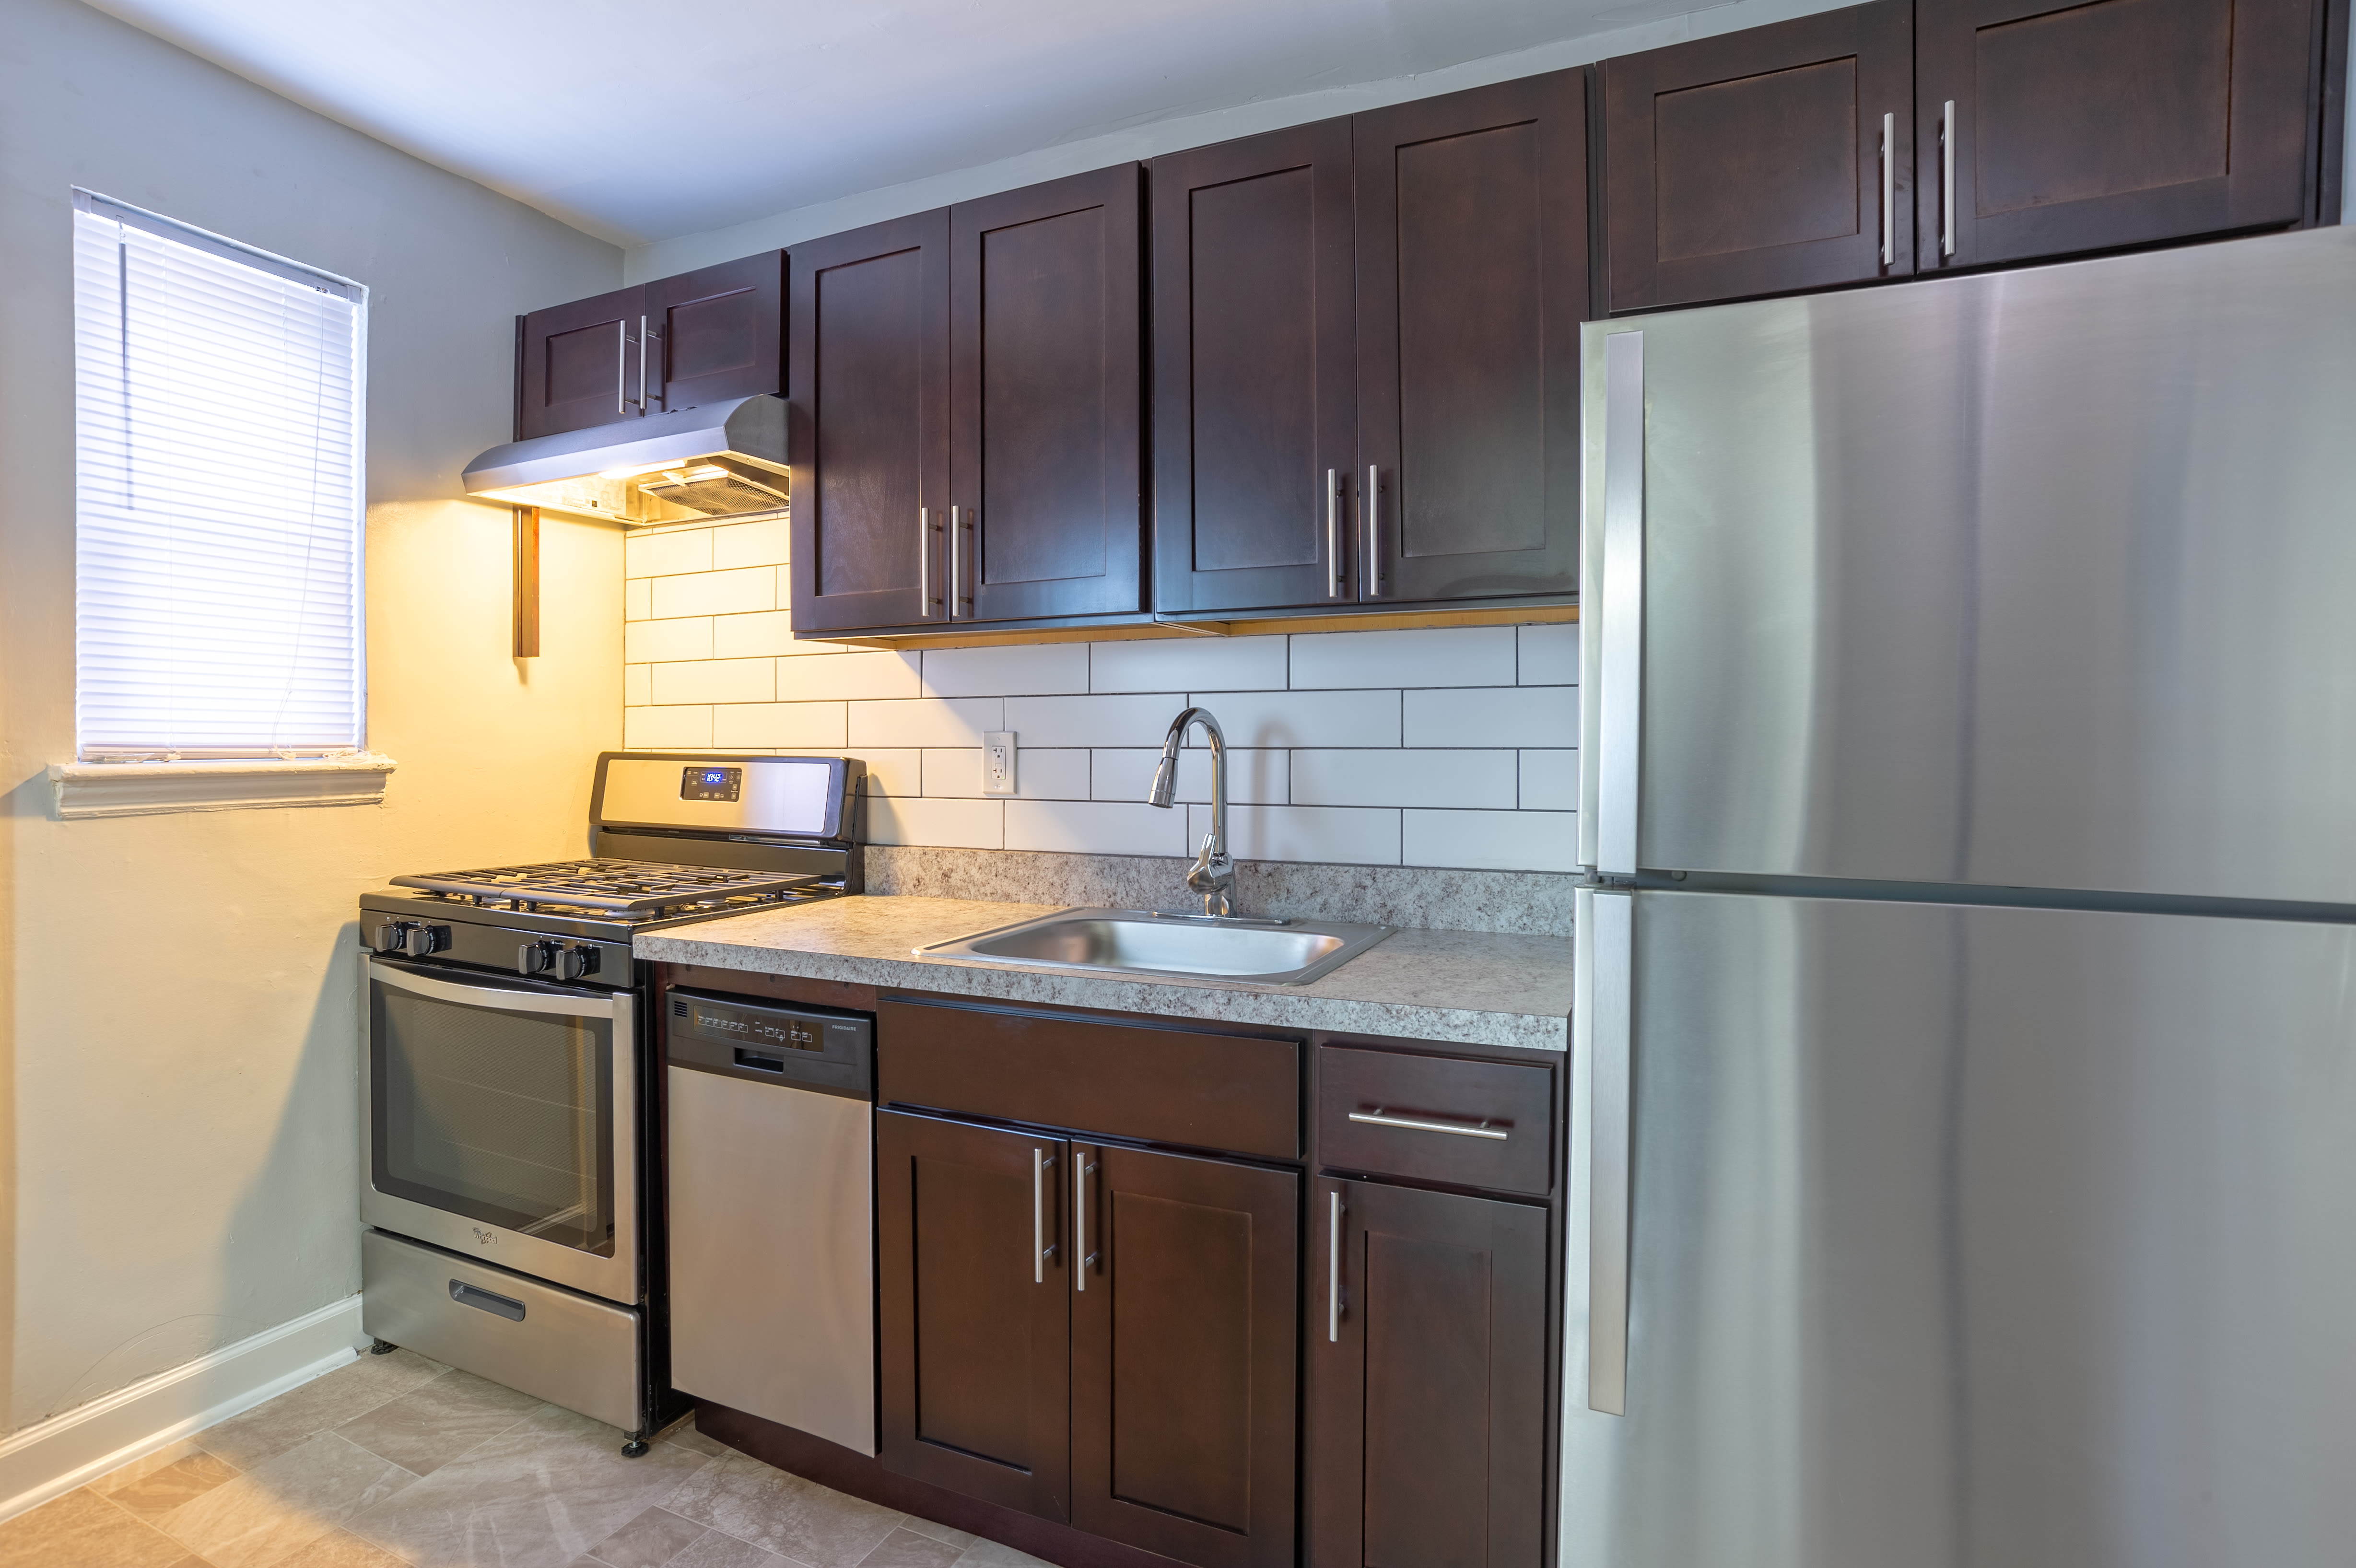 View Amenities at The Woodlands, Belleville, New Jersey